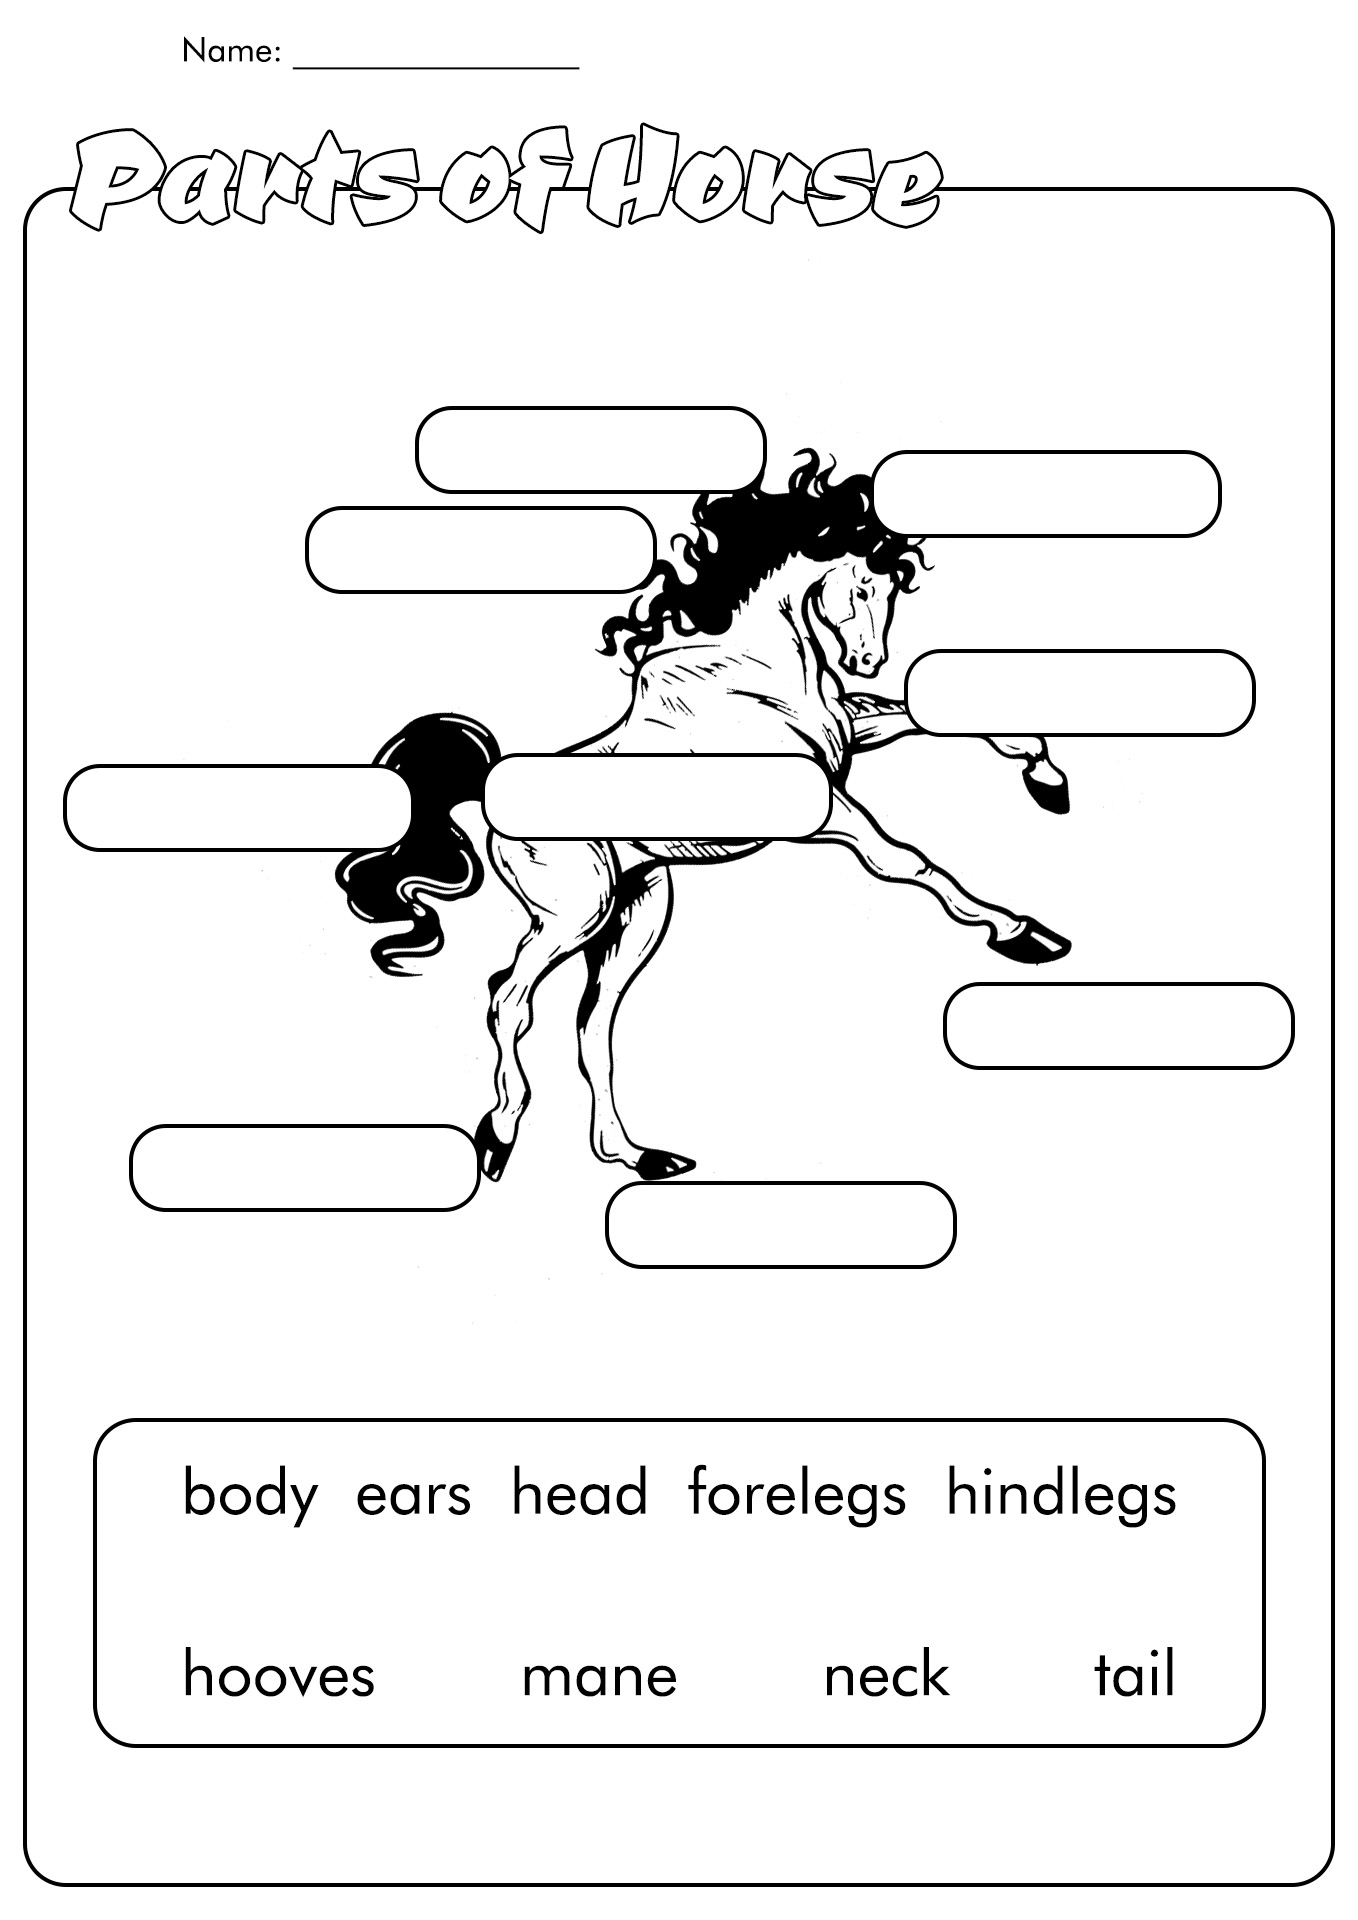 18-best-images-of-horse-study-worksheets-horse-riding-posture